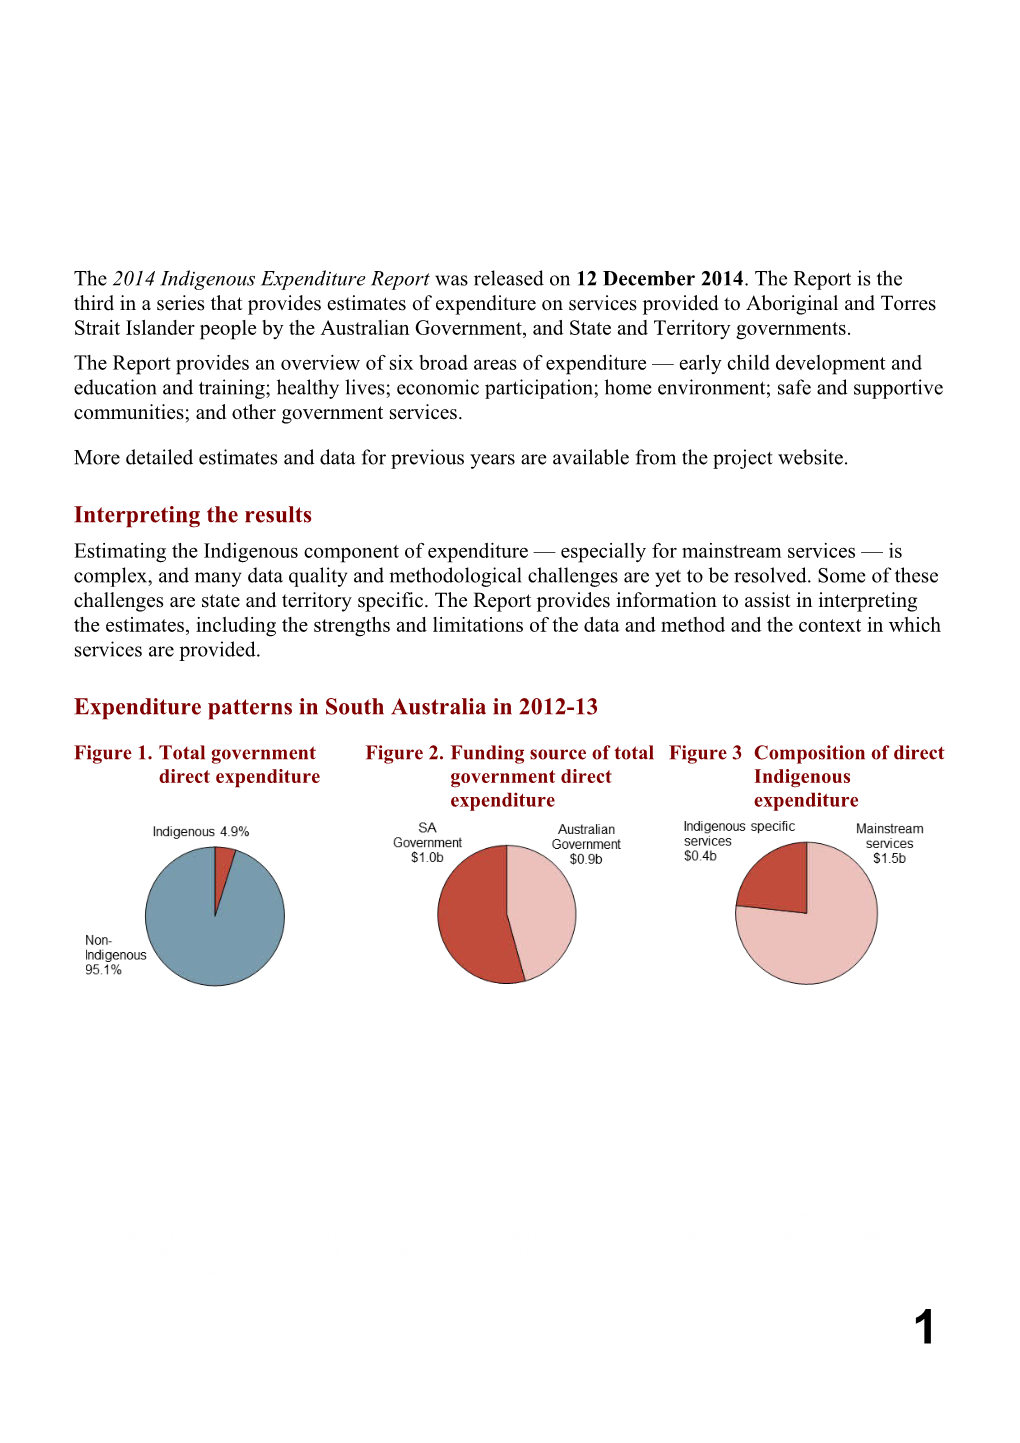 Expenditure Patterns in South Australia in 2012-13